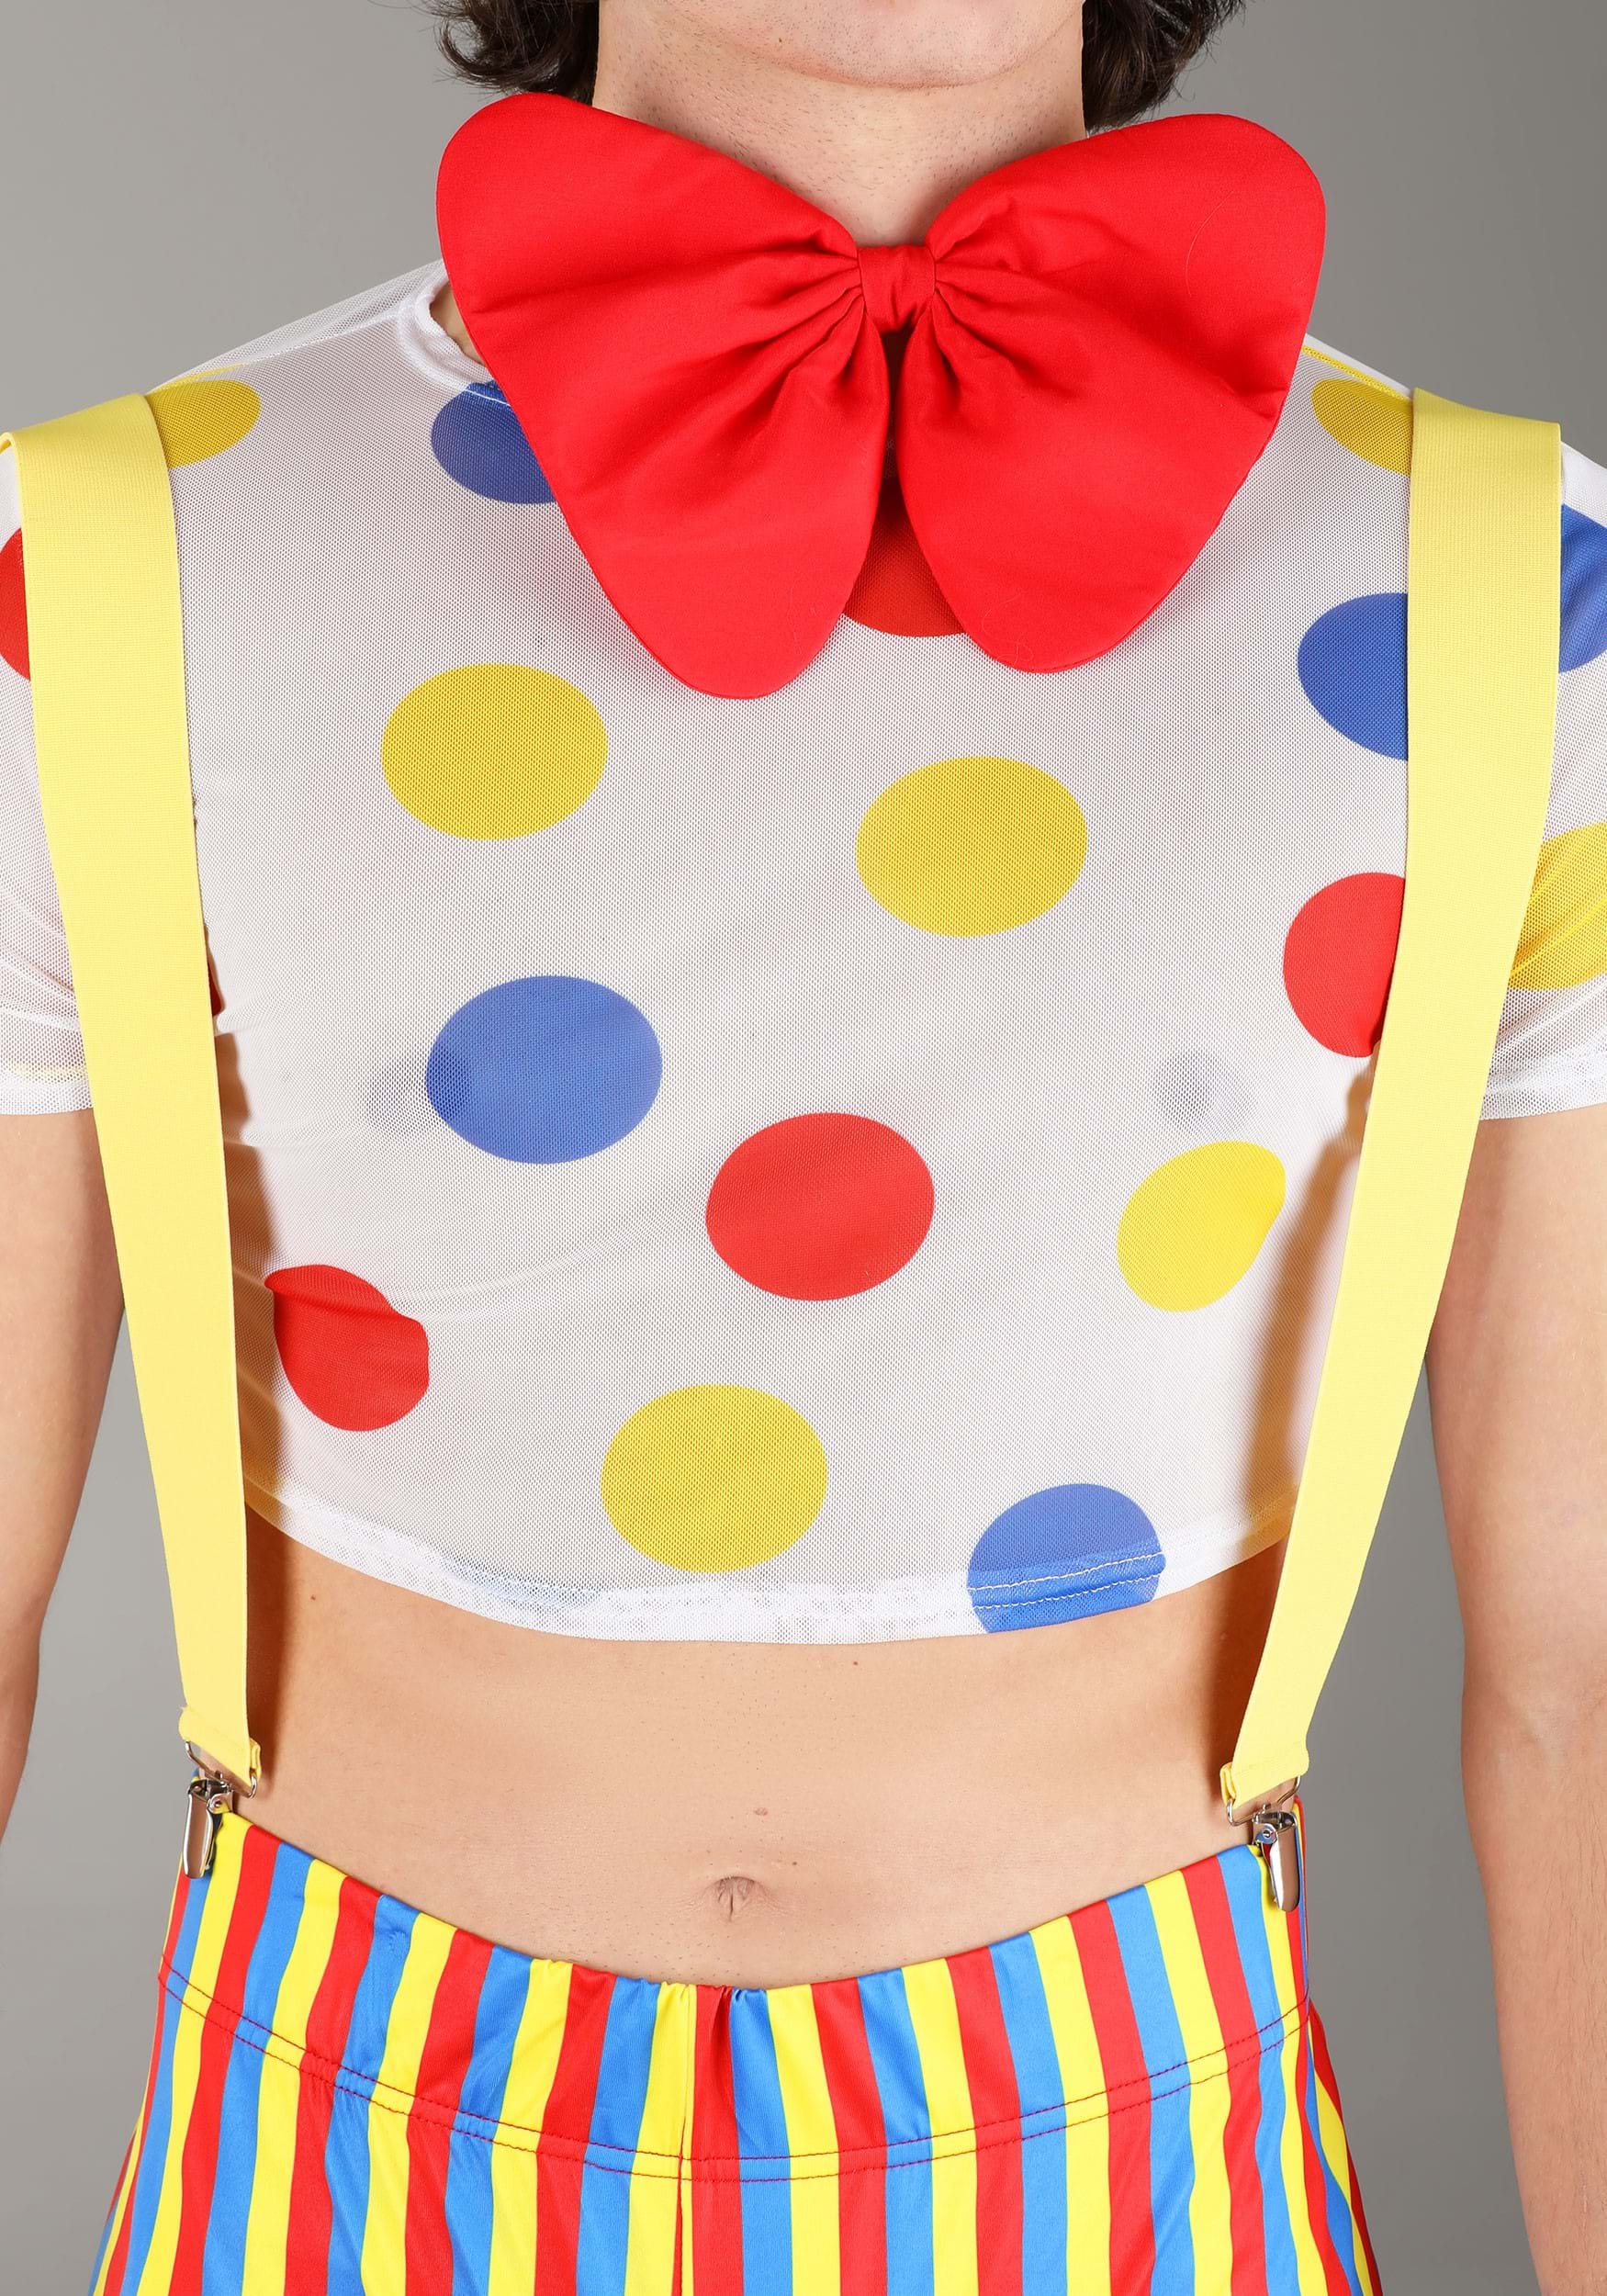 1750px x 2500px - Sexy Clown Costume for Men